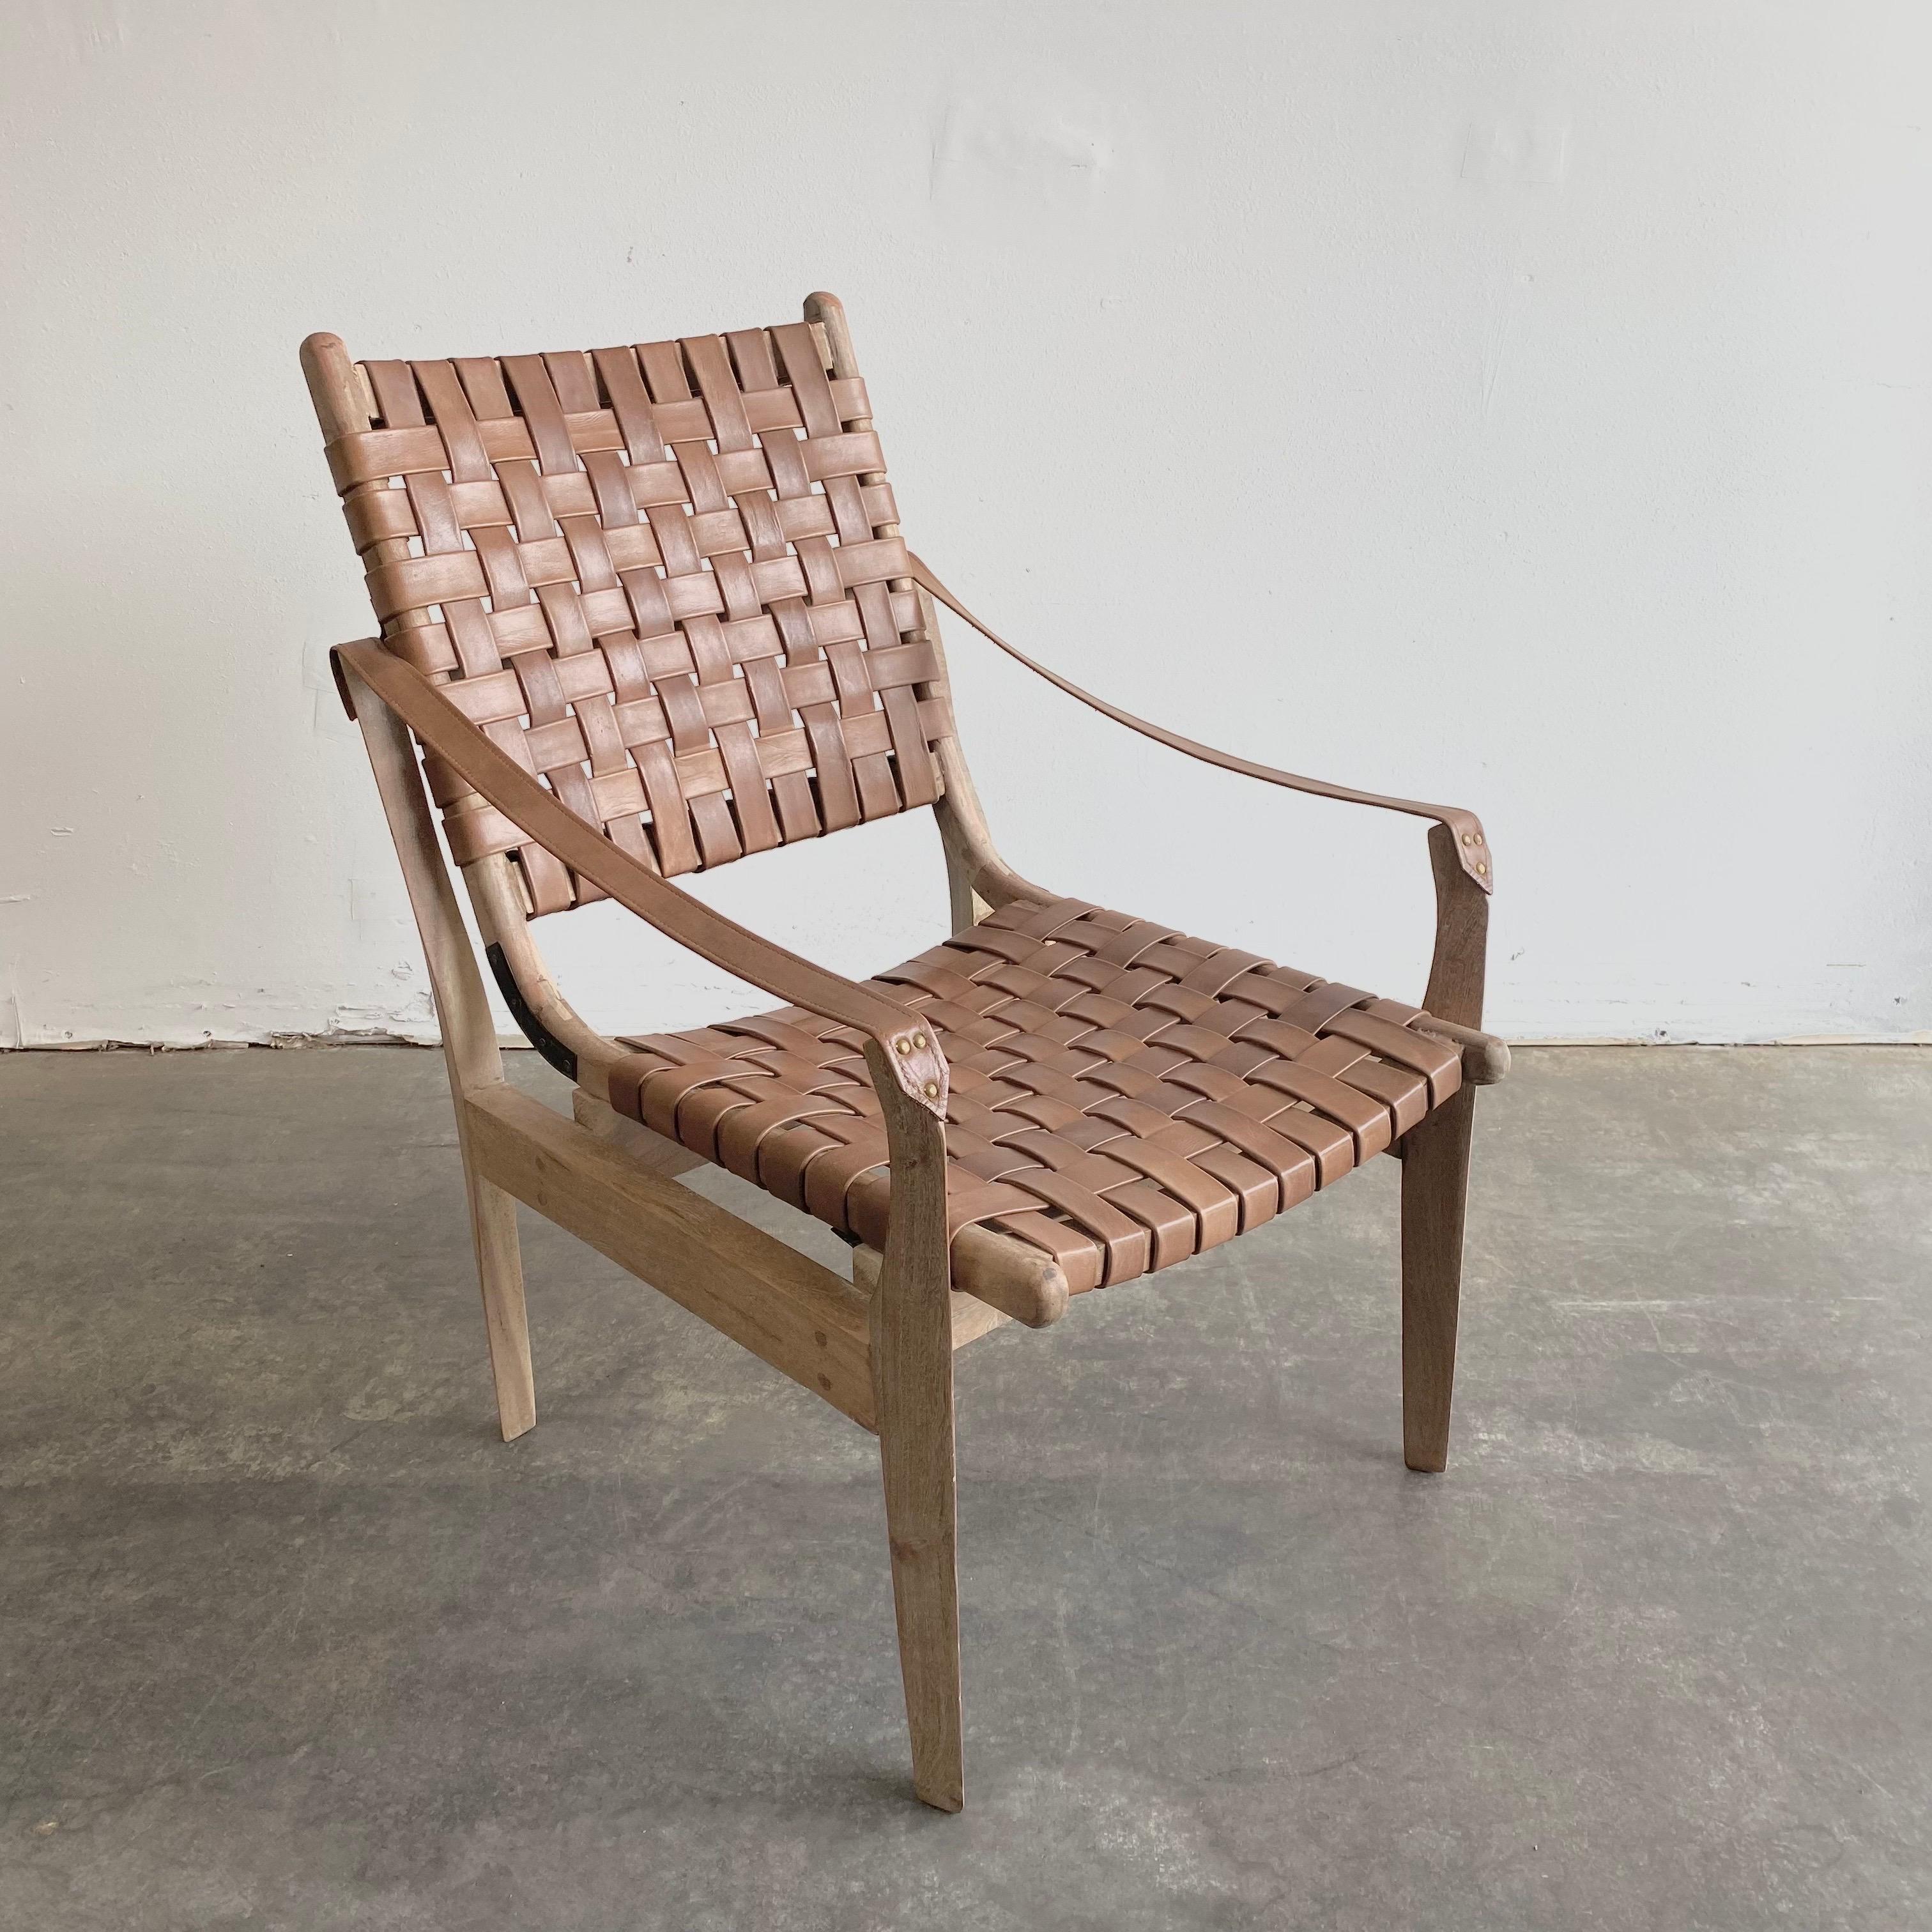 Modern woven leather strap teak wood chair
New teak wood chair with medium saddle colored leather seat and backs, and leather strap arms.
There are 2 available, please check listing quantity.
Size: 36